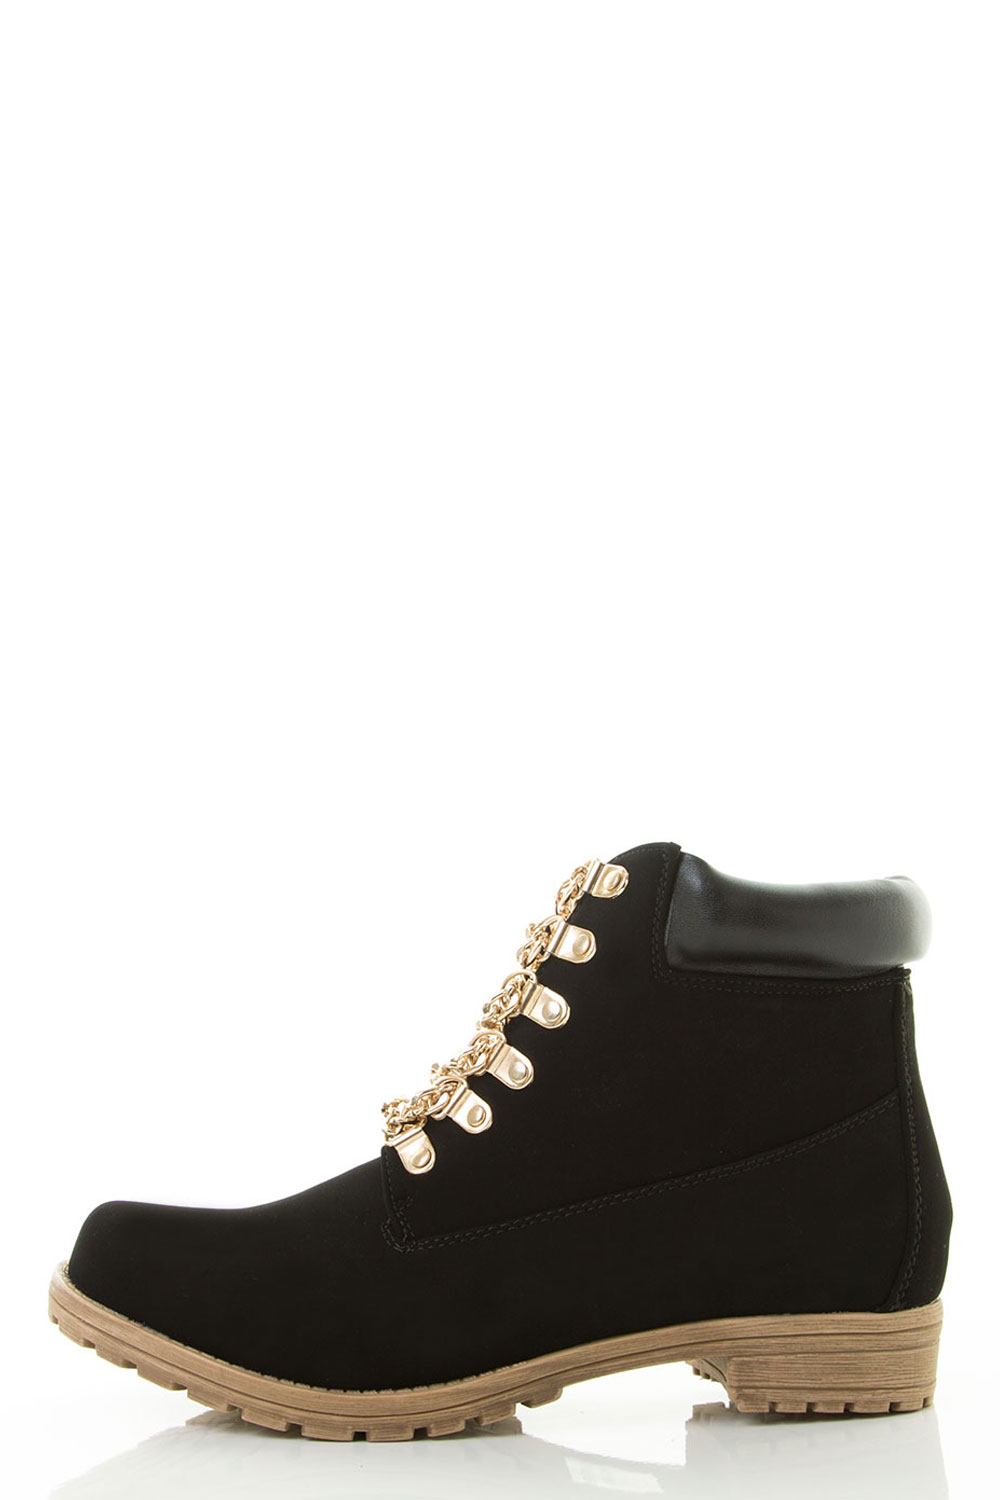 ELLIMAX.COM PRODUCTS :: Shoes :: :: Ankle Booties :: Lace Metal Gold Chain Military Combat